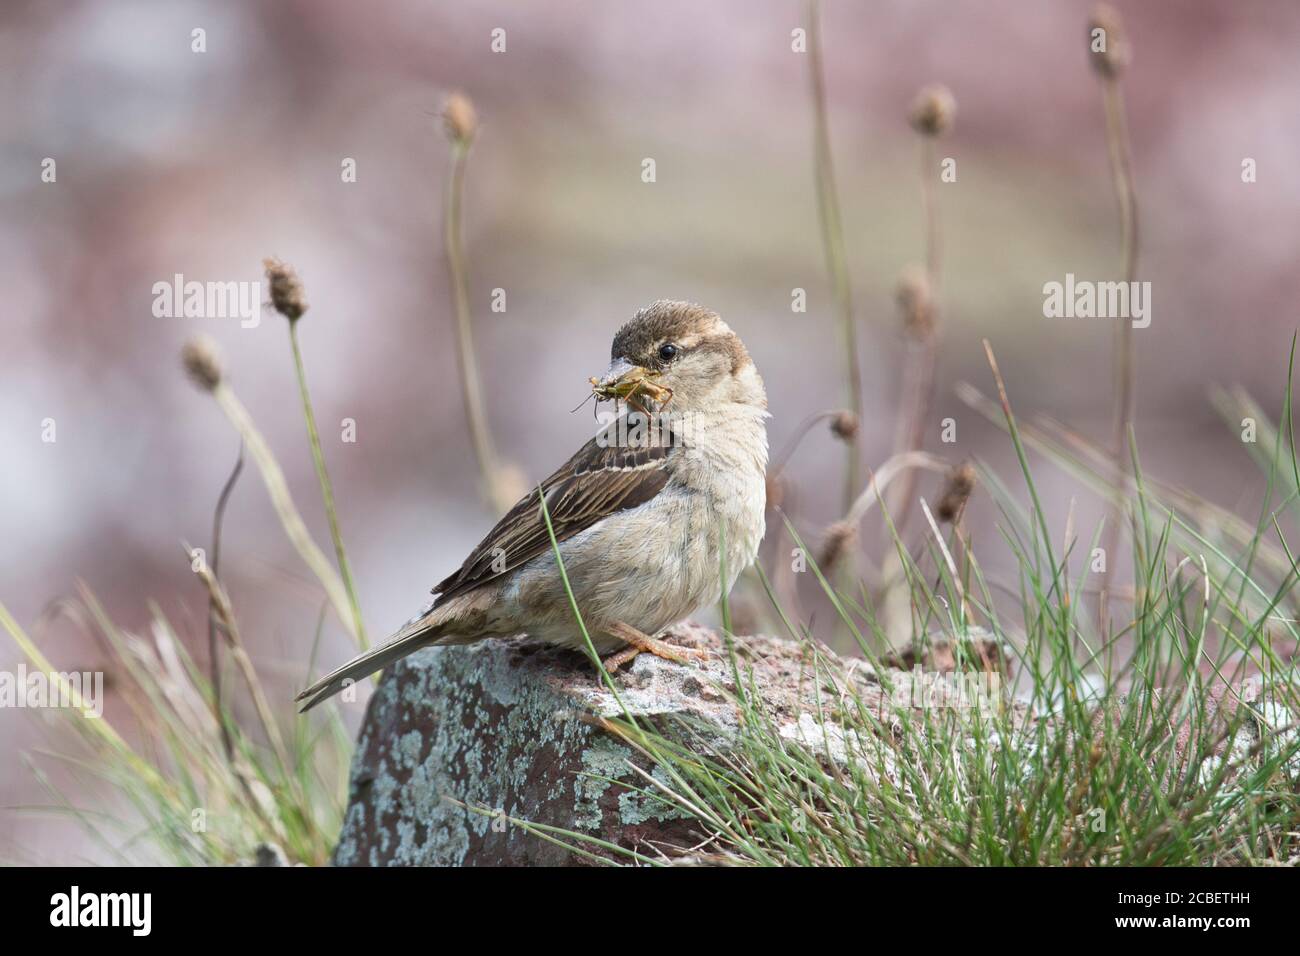 Female house sparrow (Passer domesticus) with grasshopper prey Stock Photo